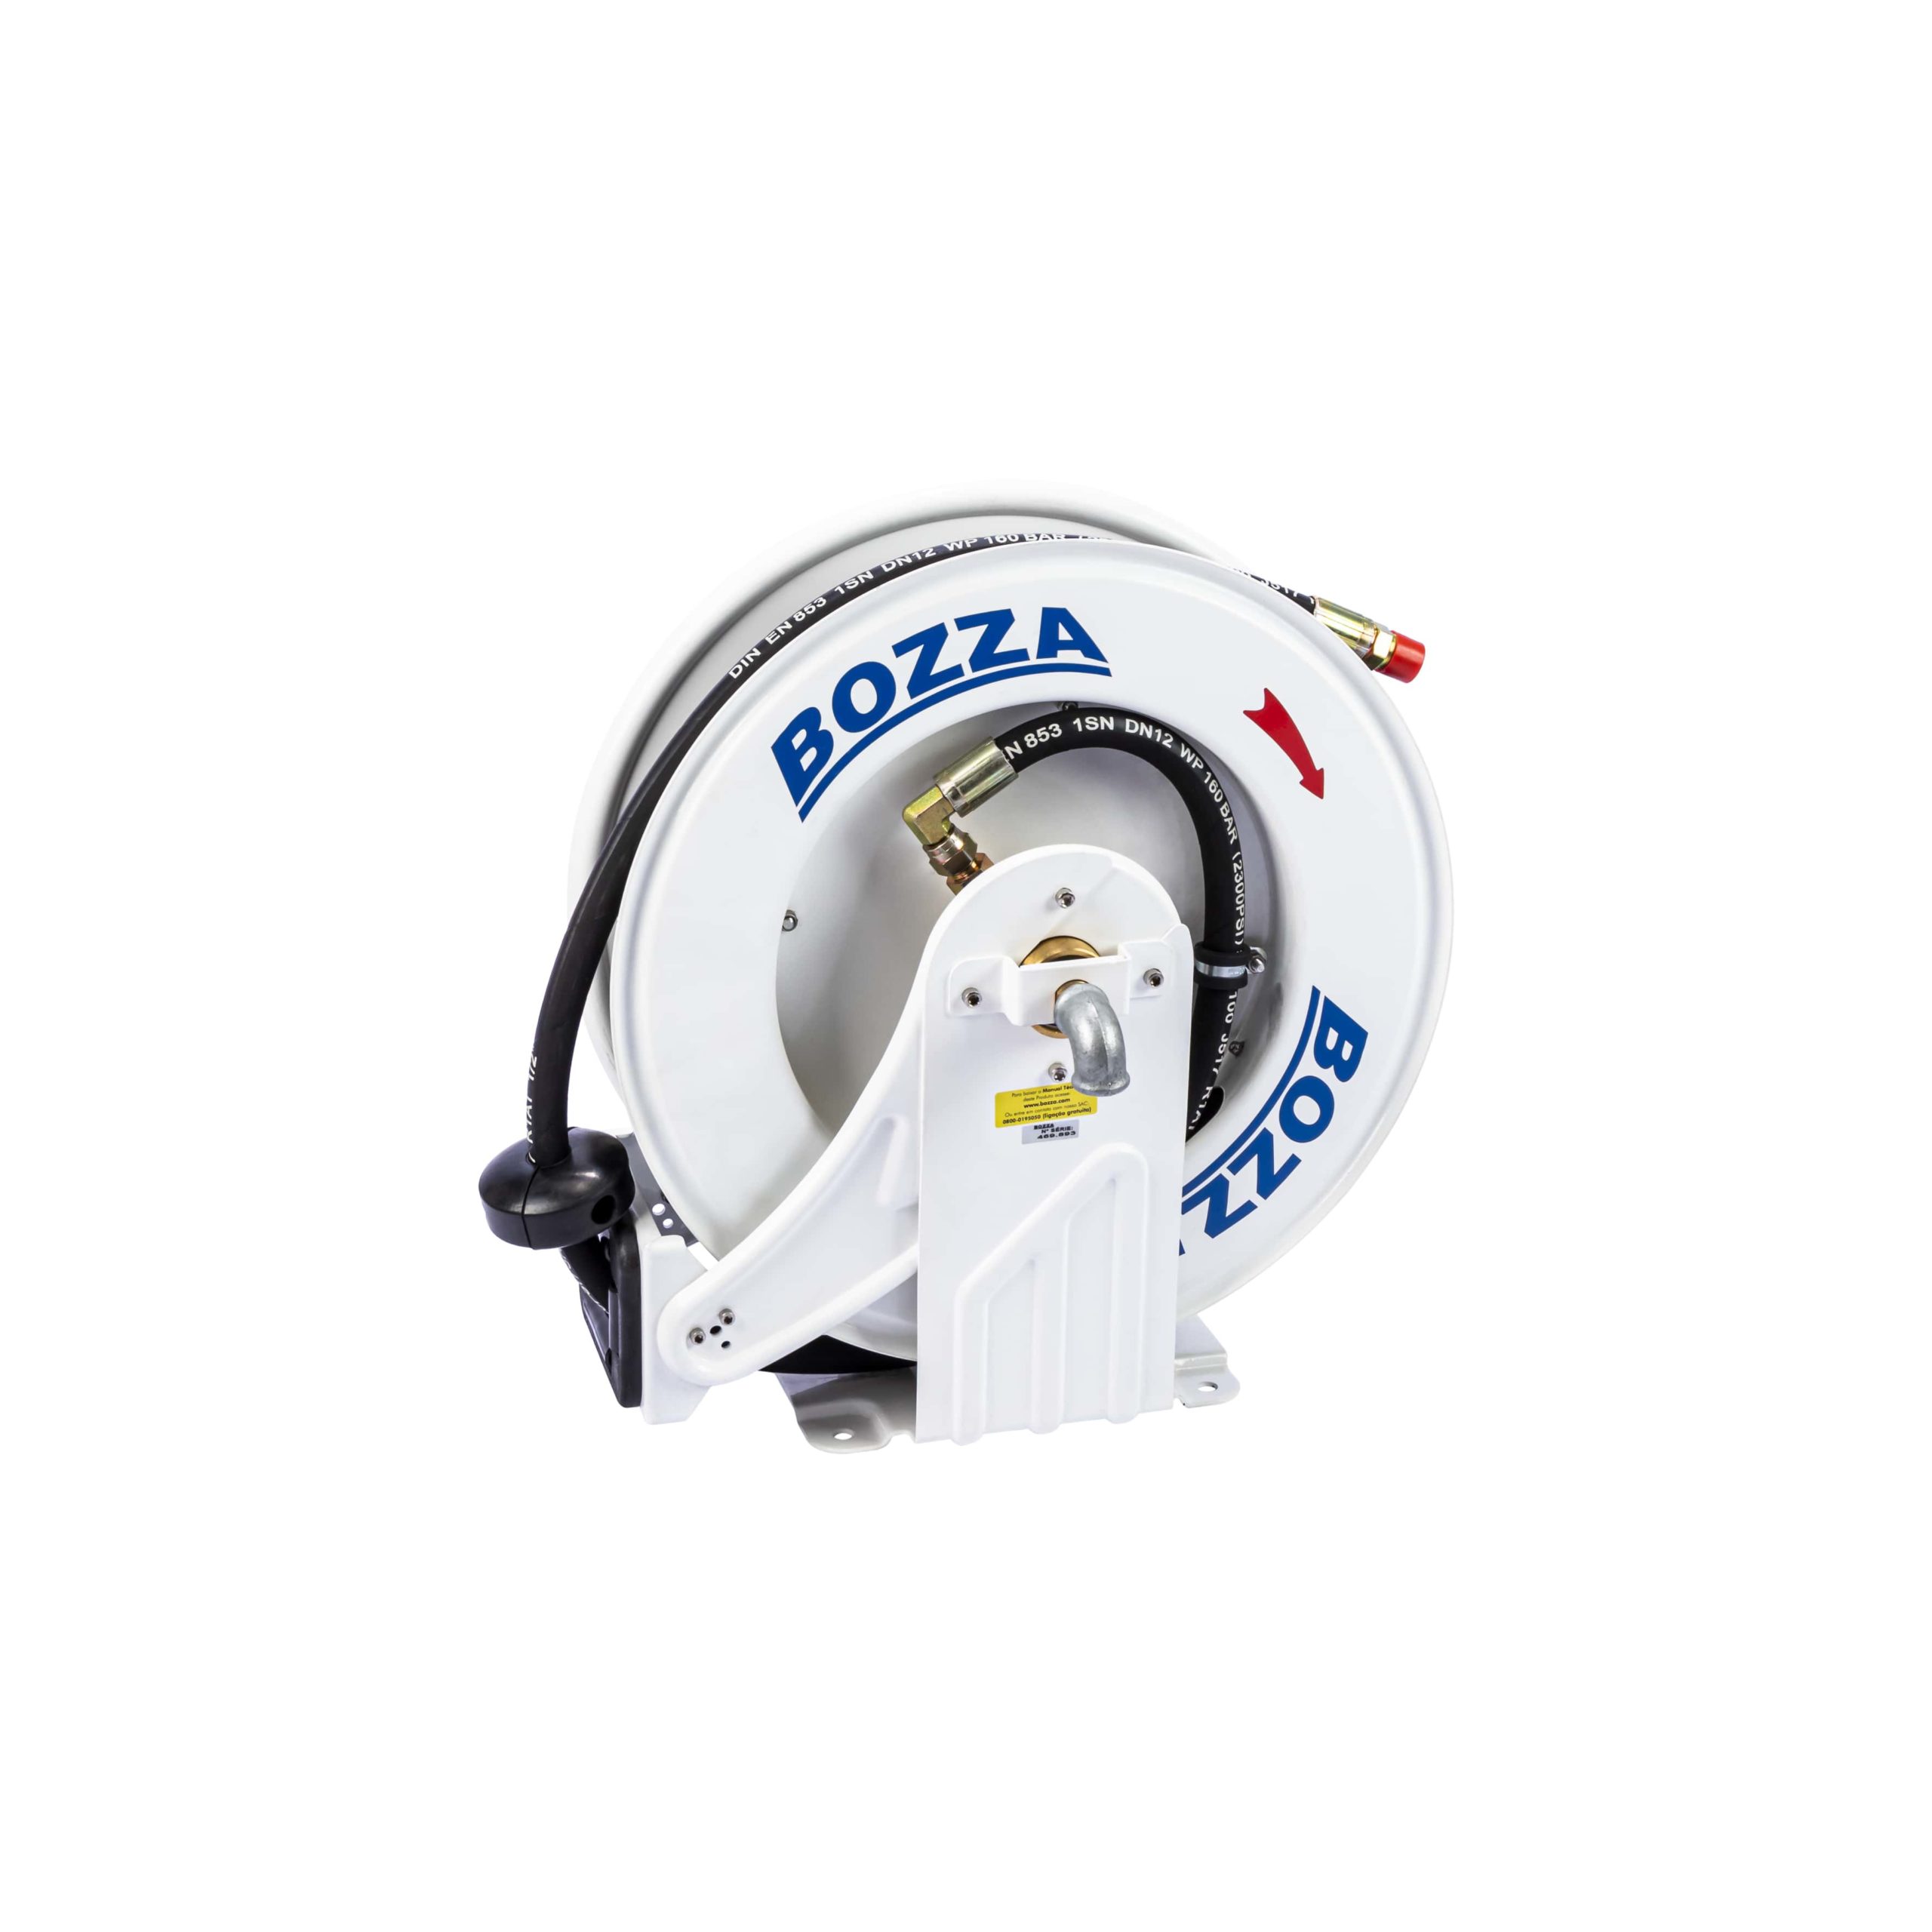 Hose Reel with Automatic Retraction for Oil SNAKE-OL15 - Bozza